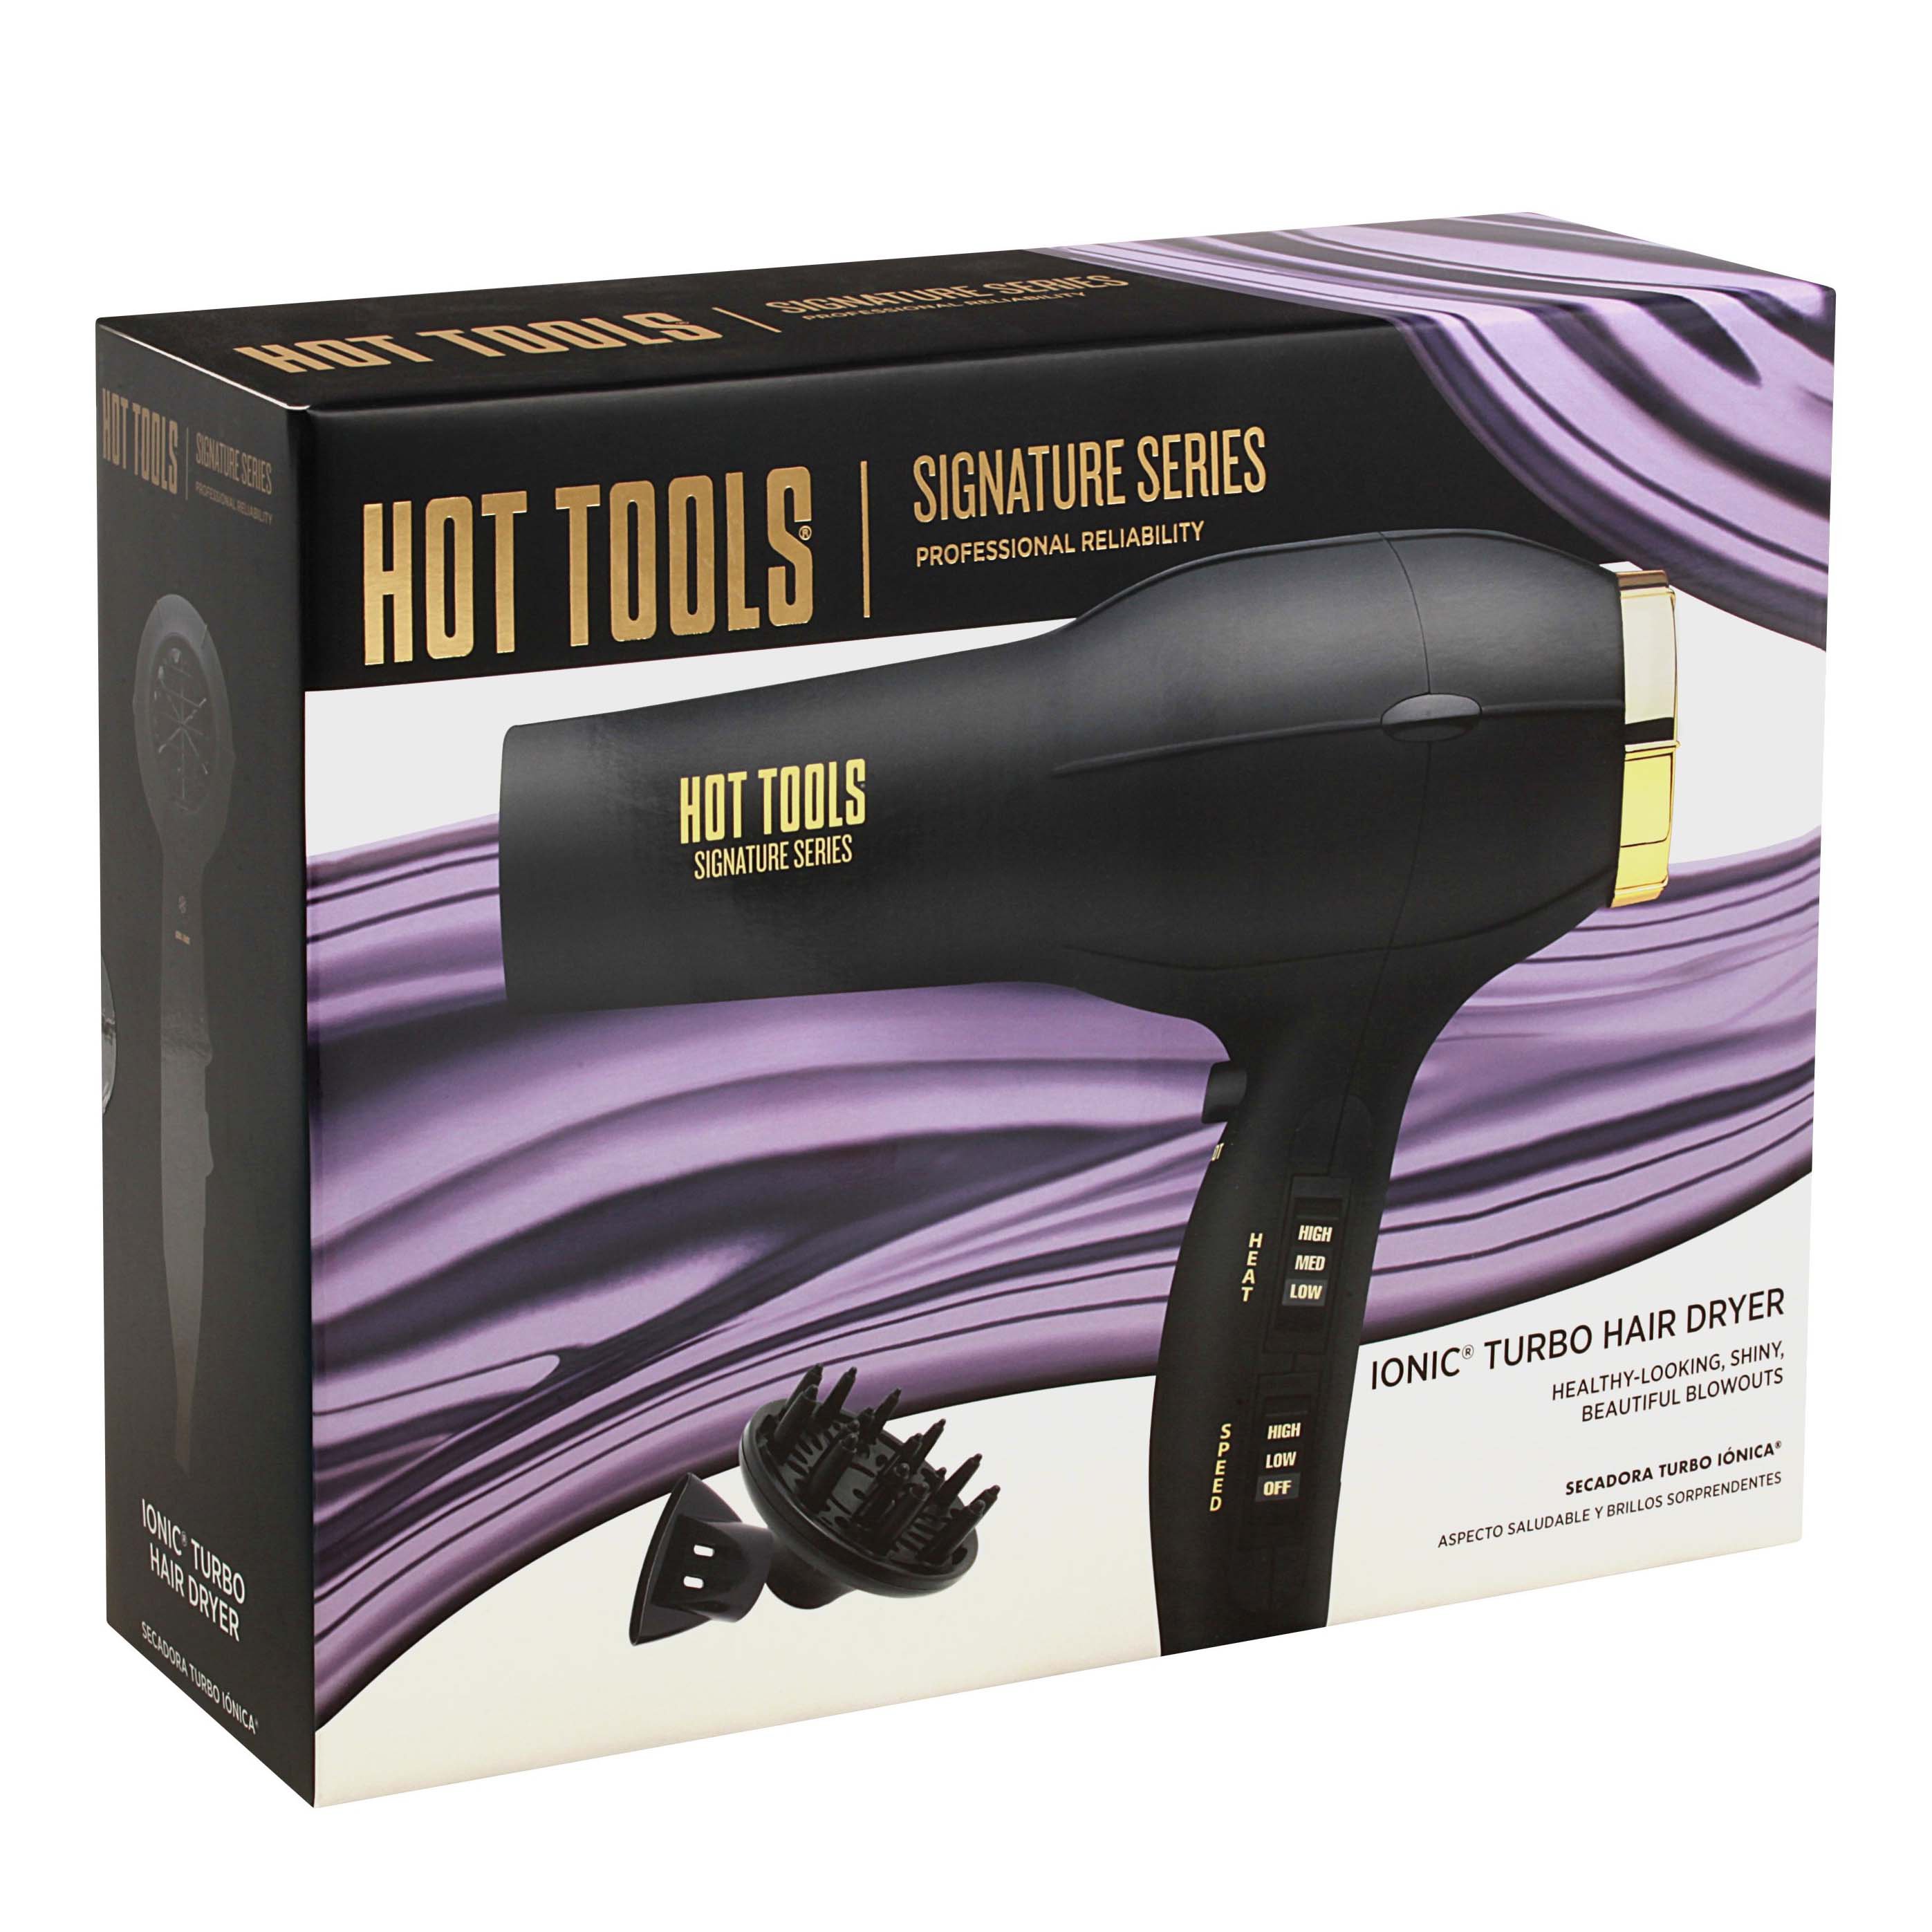 Hot Tools Signature Series Ionic Turbo Hair Dryer - Shop Hair Dryers at